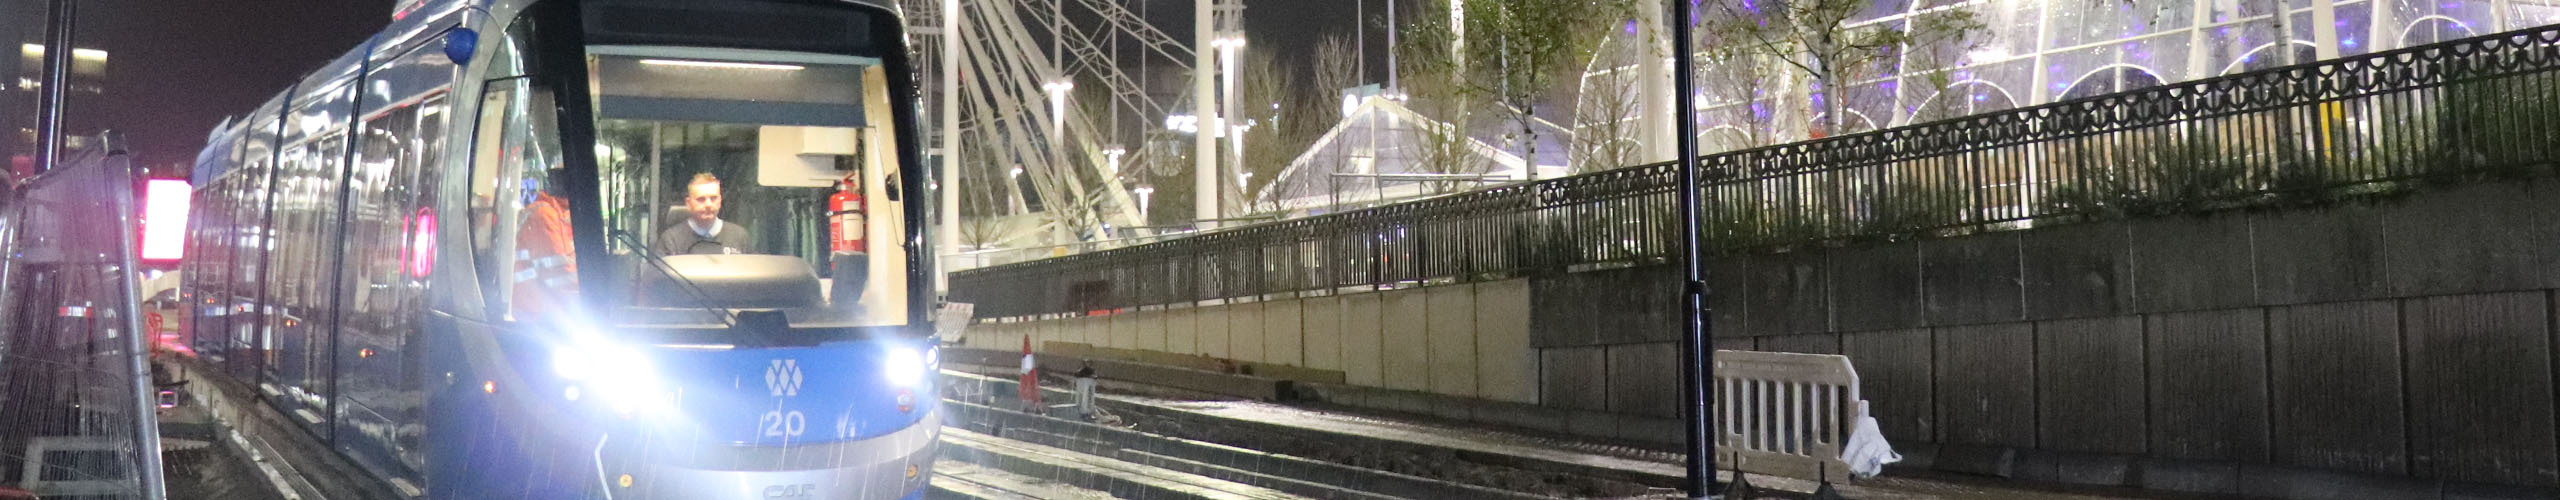 Tram on the track at night